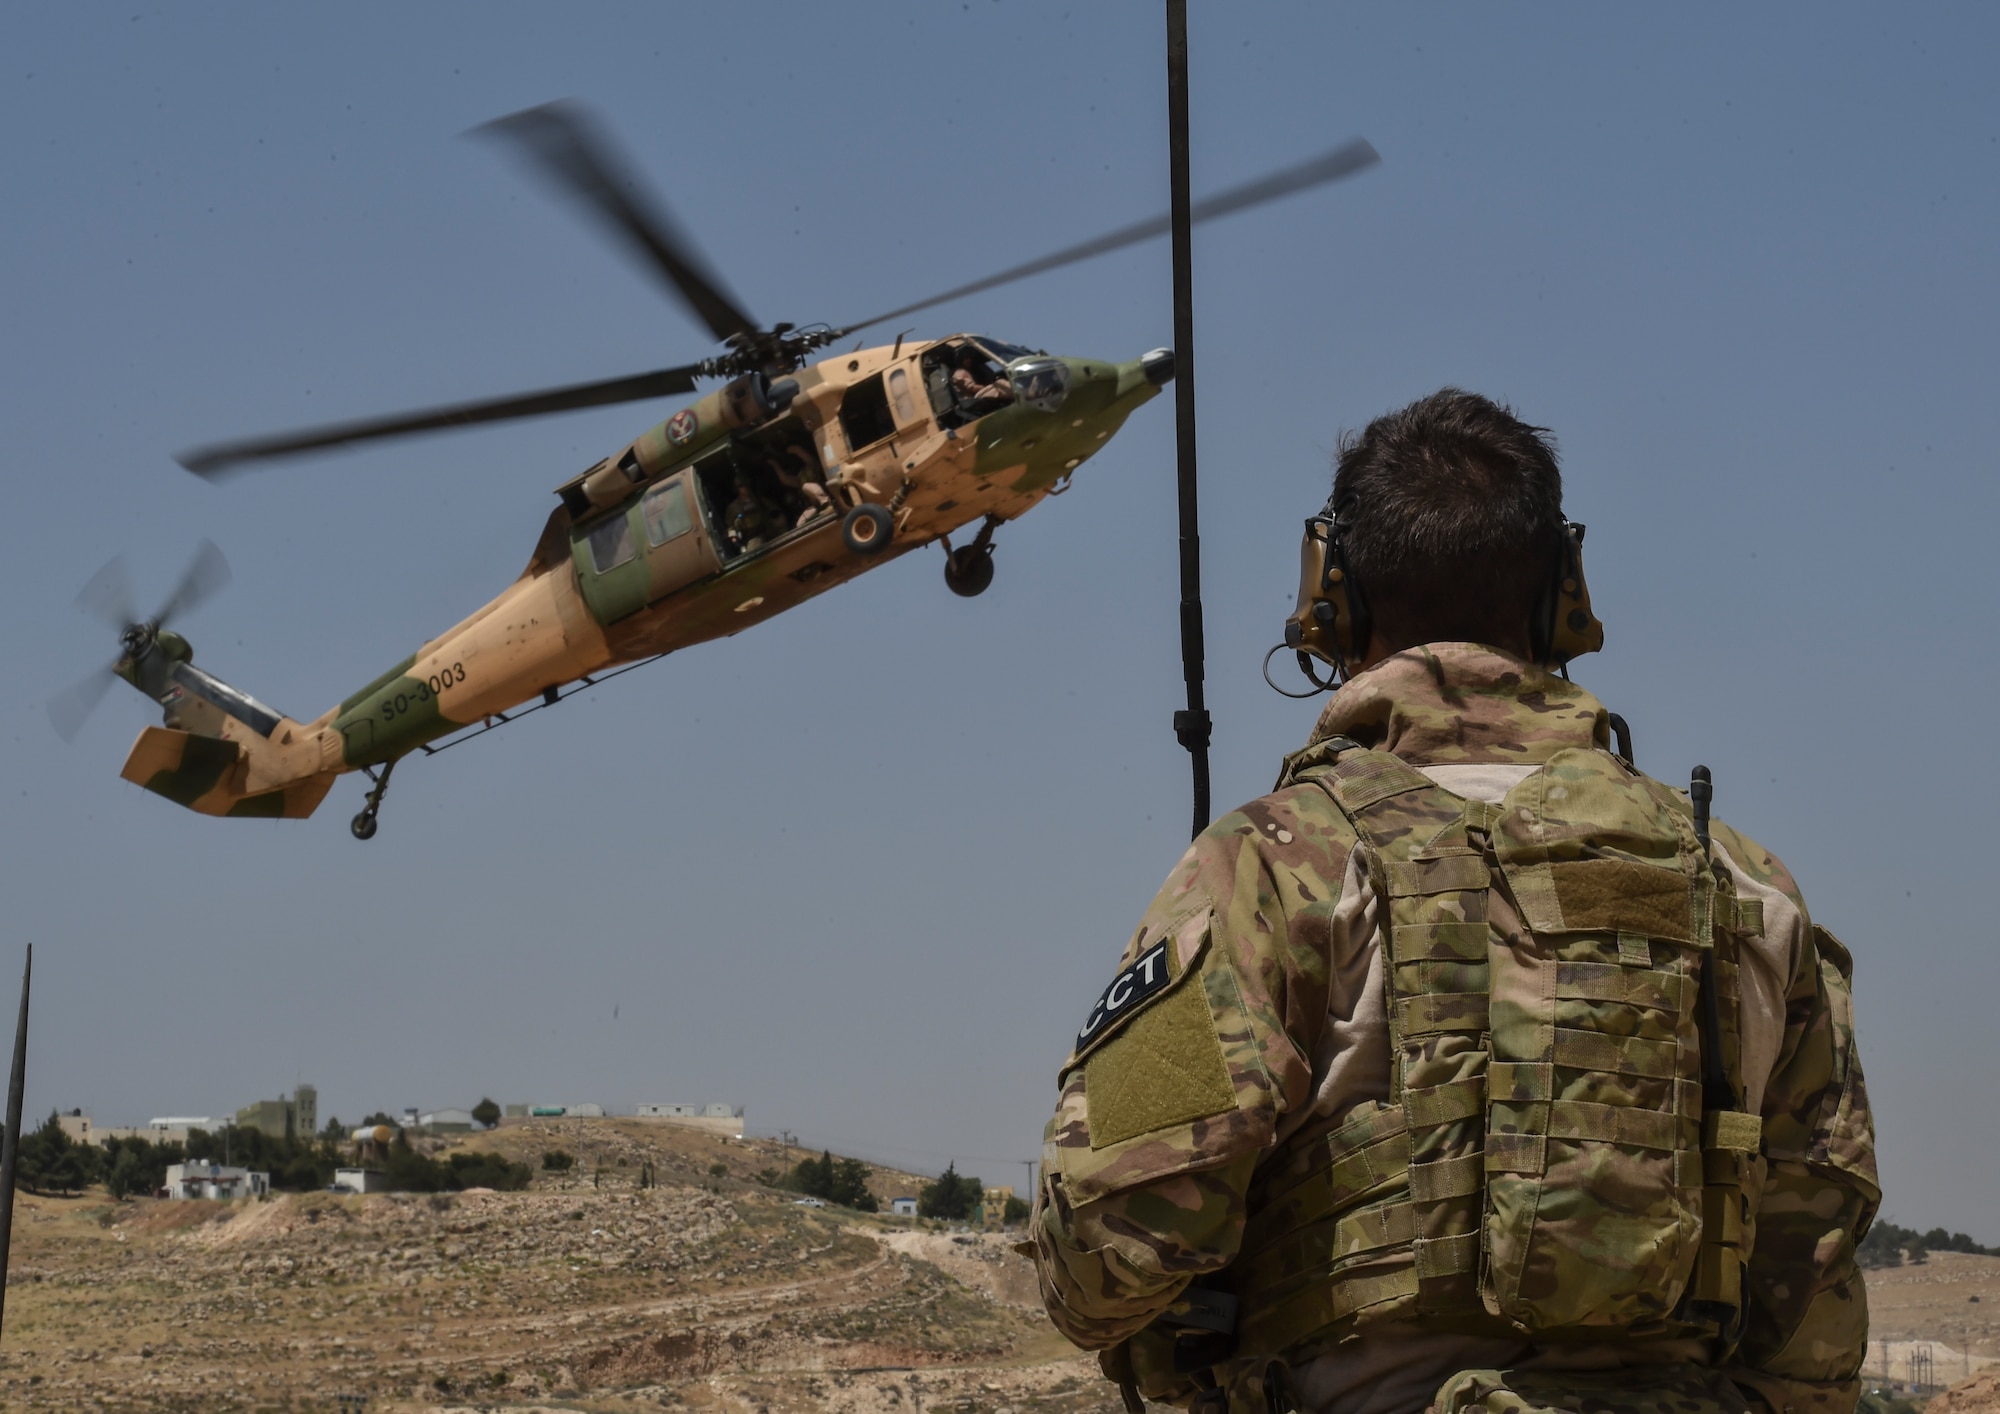 A U.S. Air Force Special Tactics Airman controls the approach of a Royal Jordanian Air Force UH-60L Blackhawk helicopter during Exercise Eager Lion for a personnel recovery training mission May 11, 2017, at King Abdullah II Special Operations Training Center. (U.S. Air Force photo/Senior Airman Ryan Conroy)